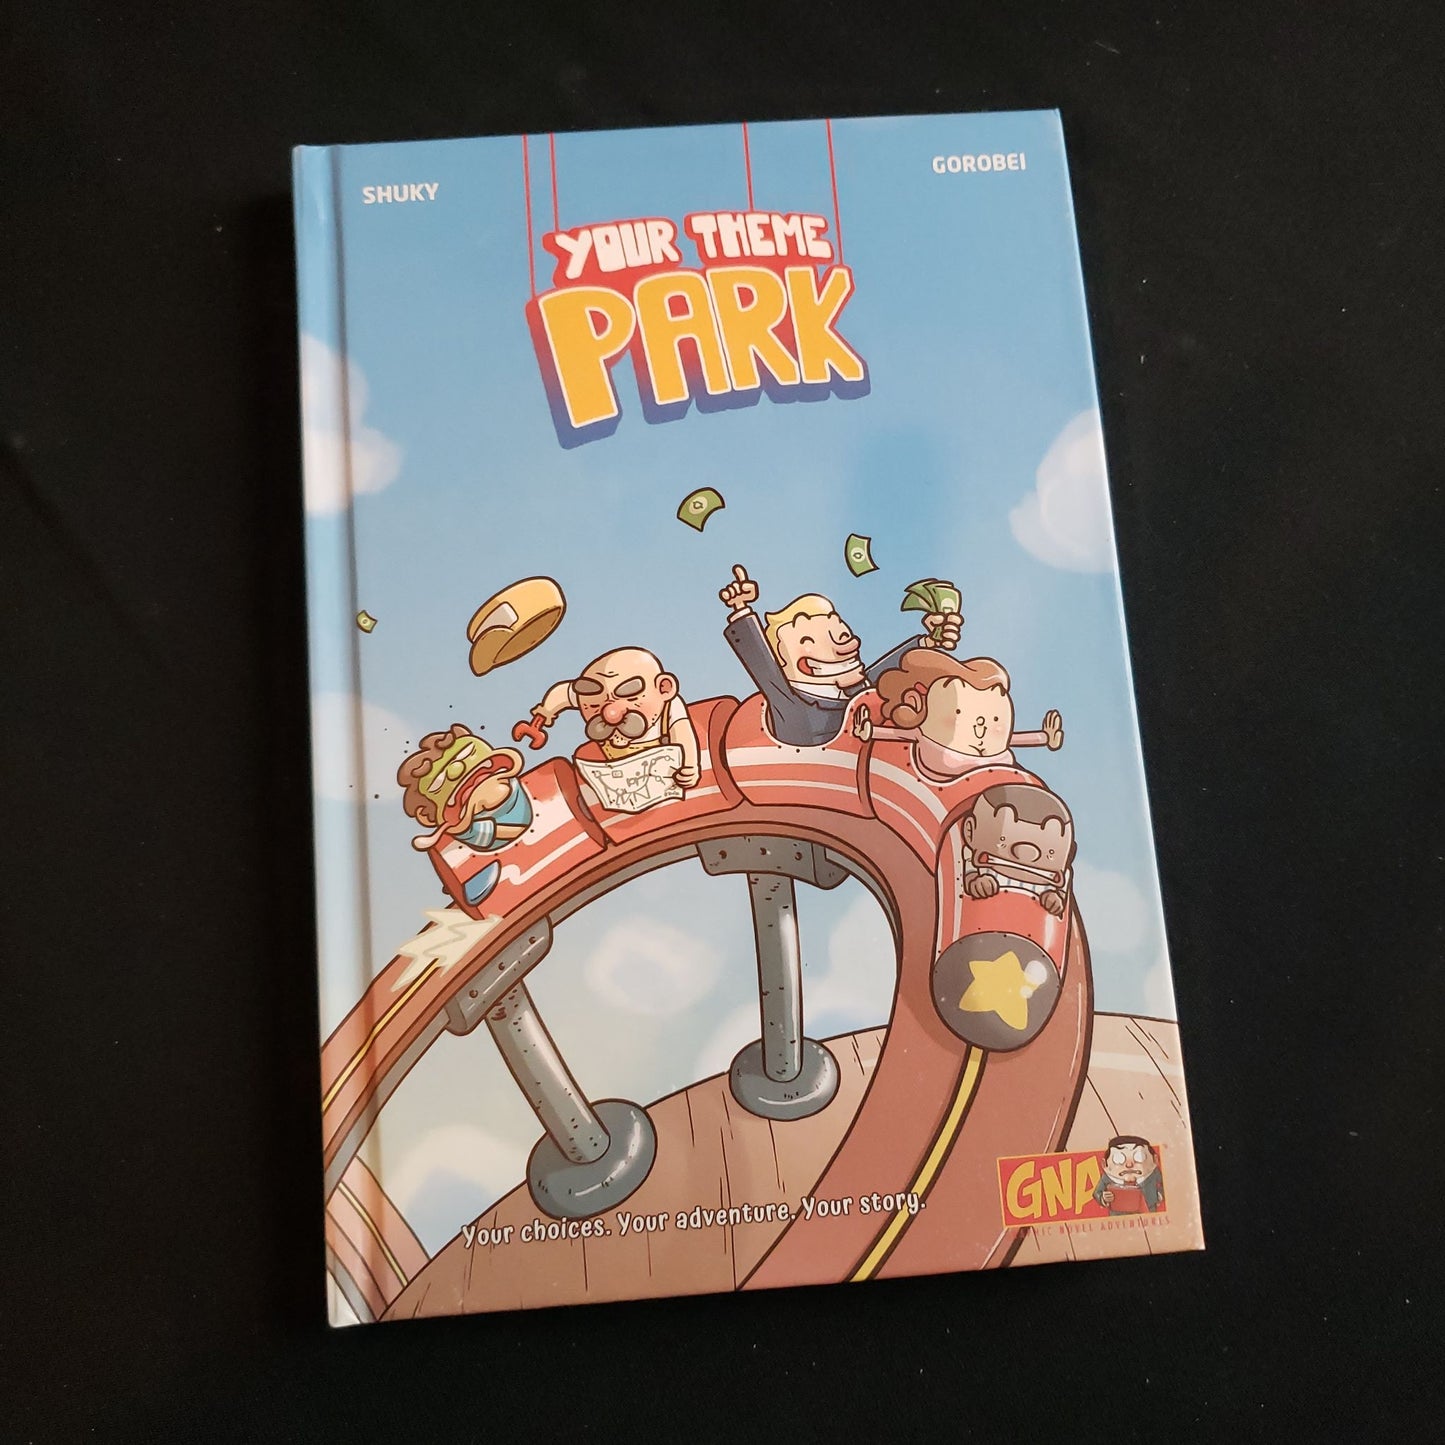 Image shows the front cover of the Your Theme Park game book